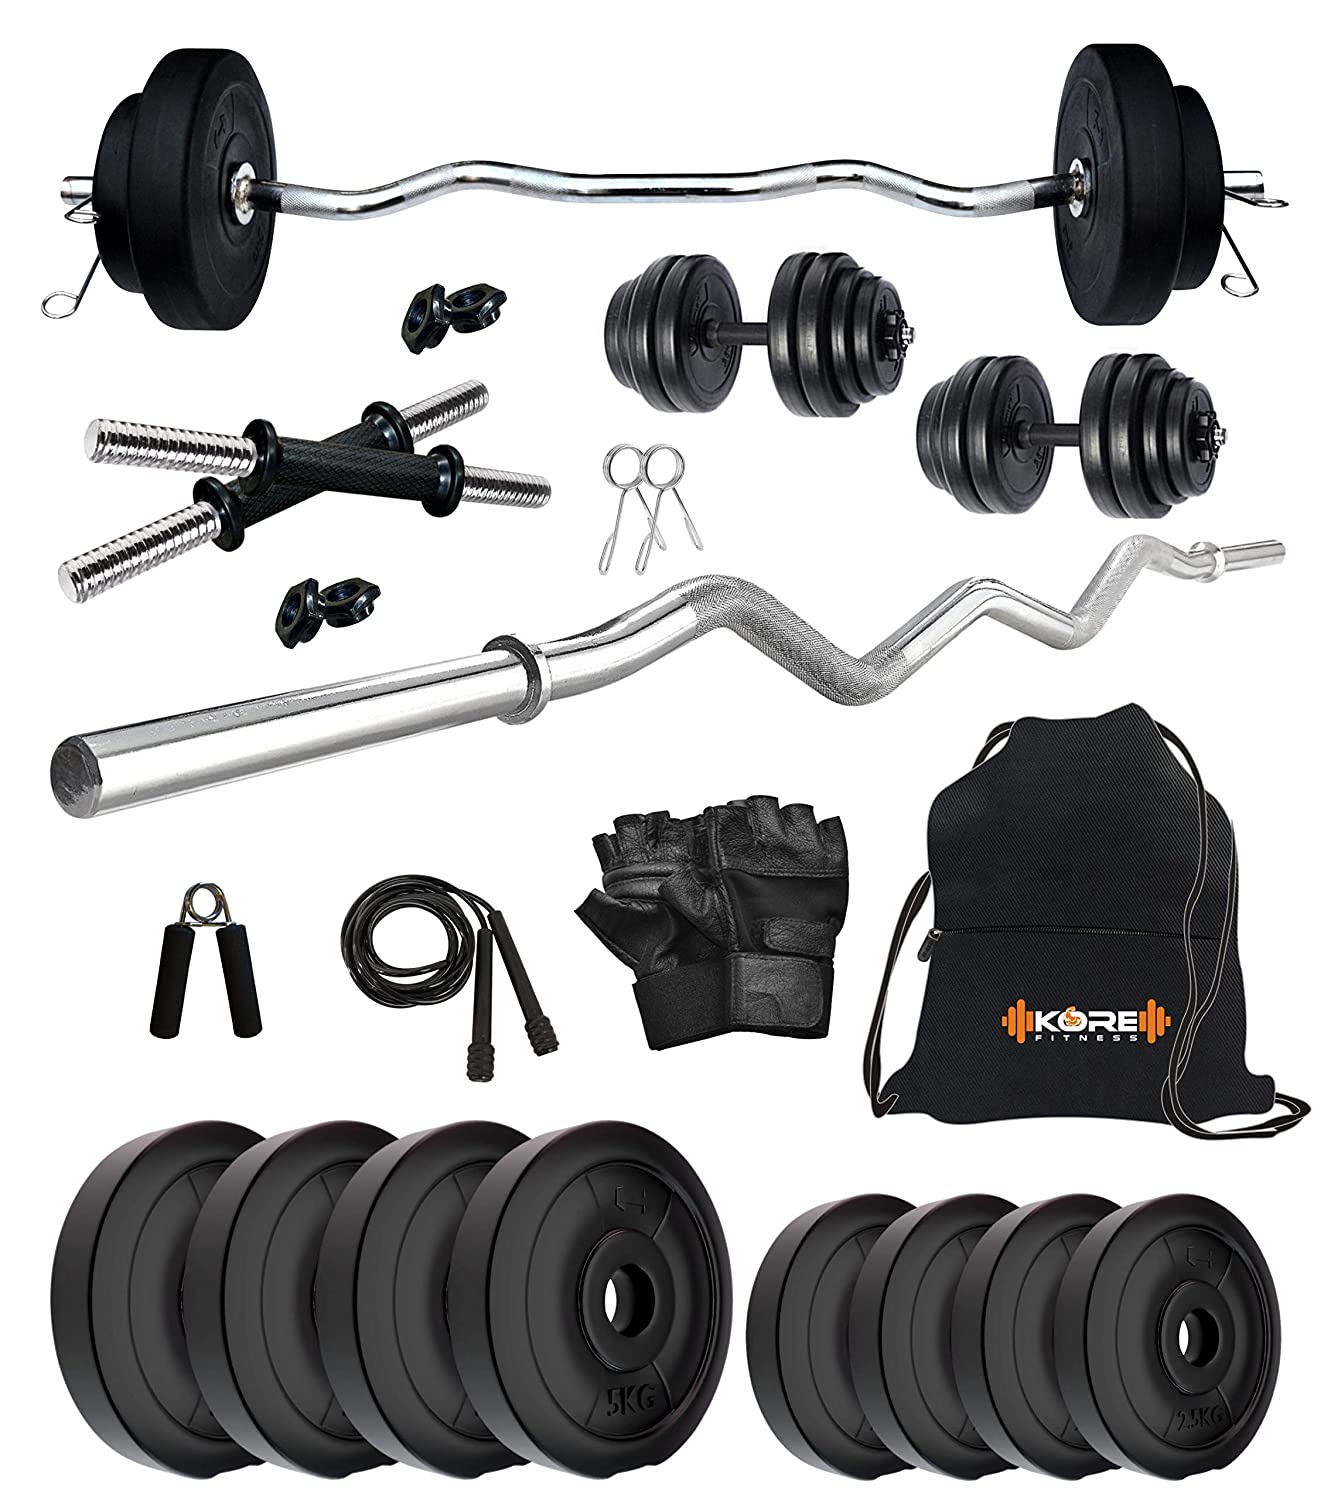 Kore PVC 30 Kg Home Gym Set with One 3 Ft Curl and One Pair Dumbbell Rods with Gym Accessories